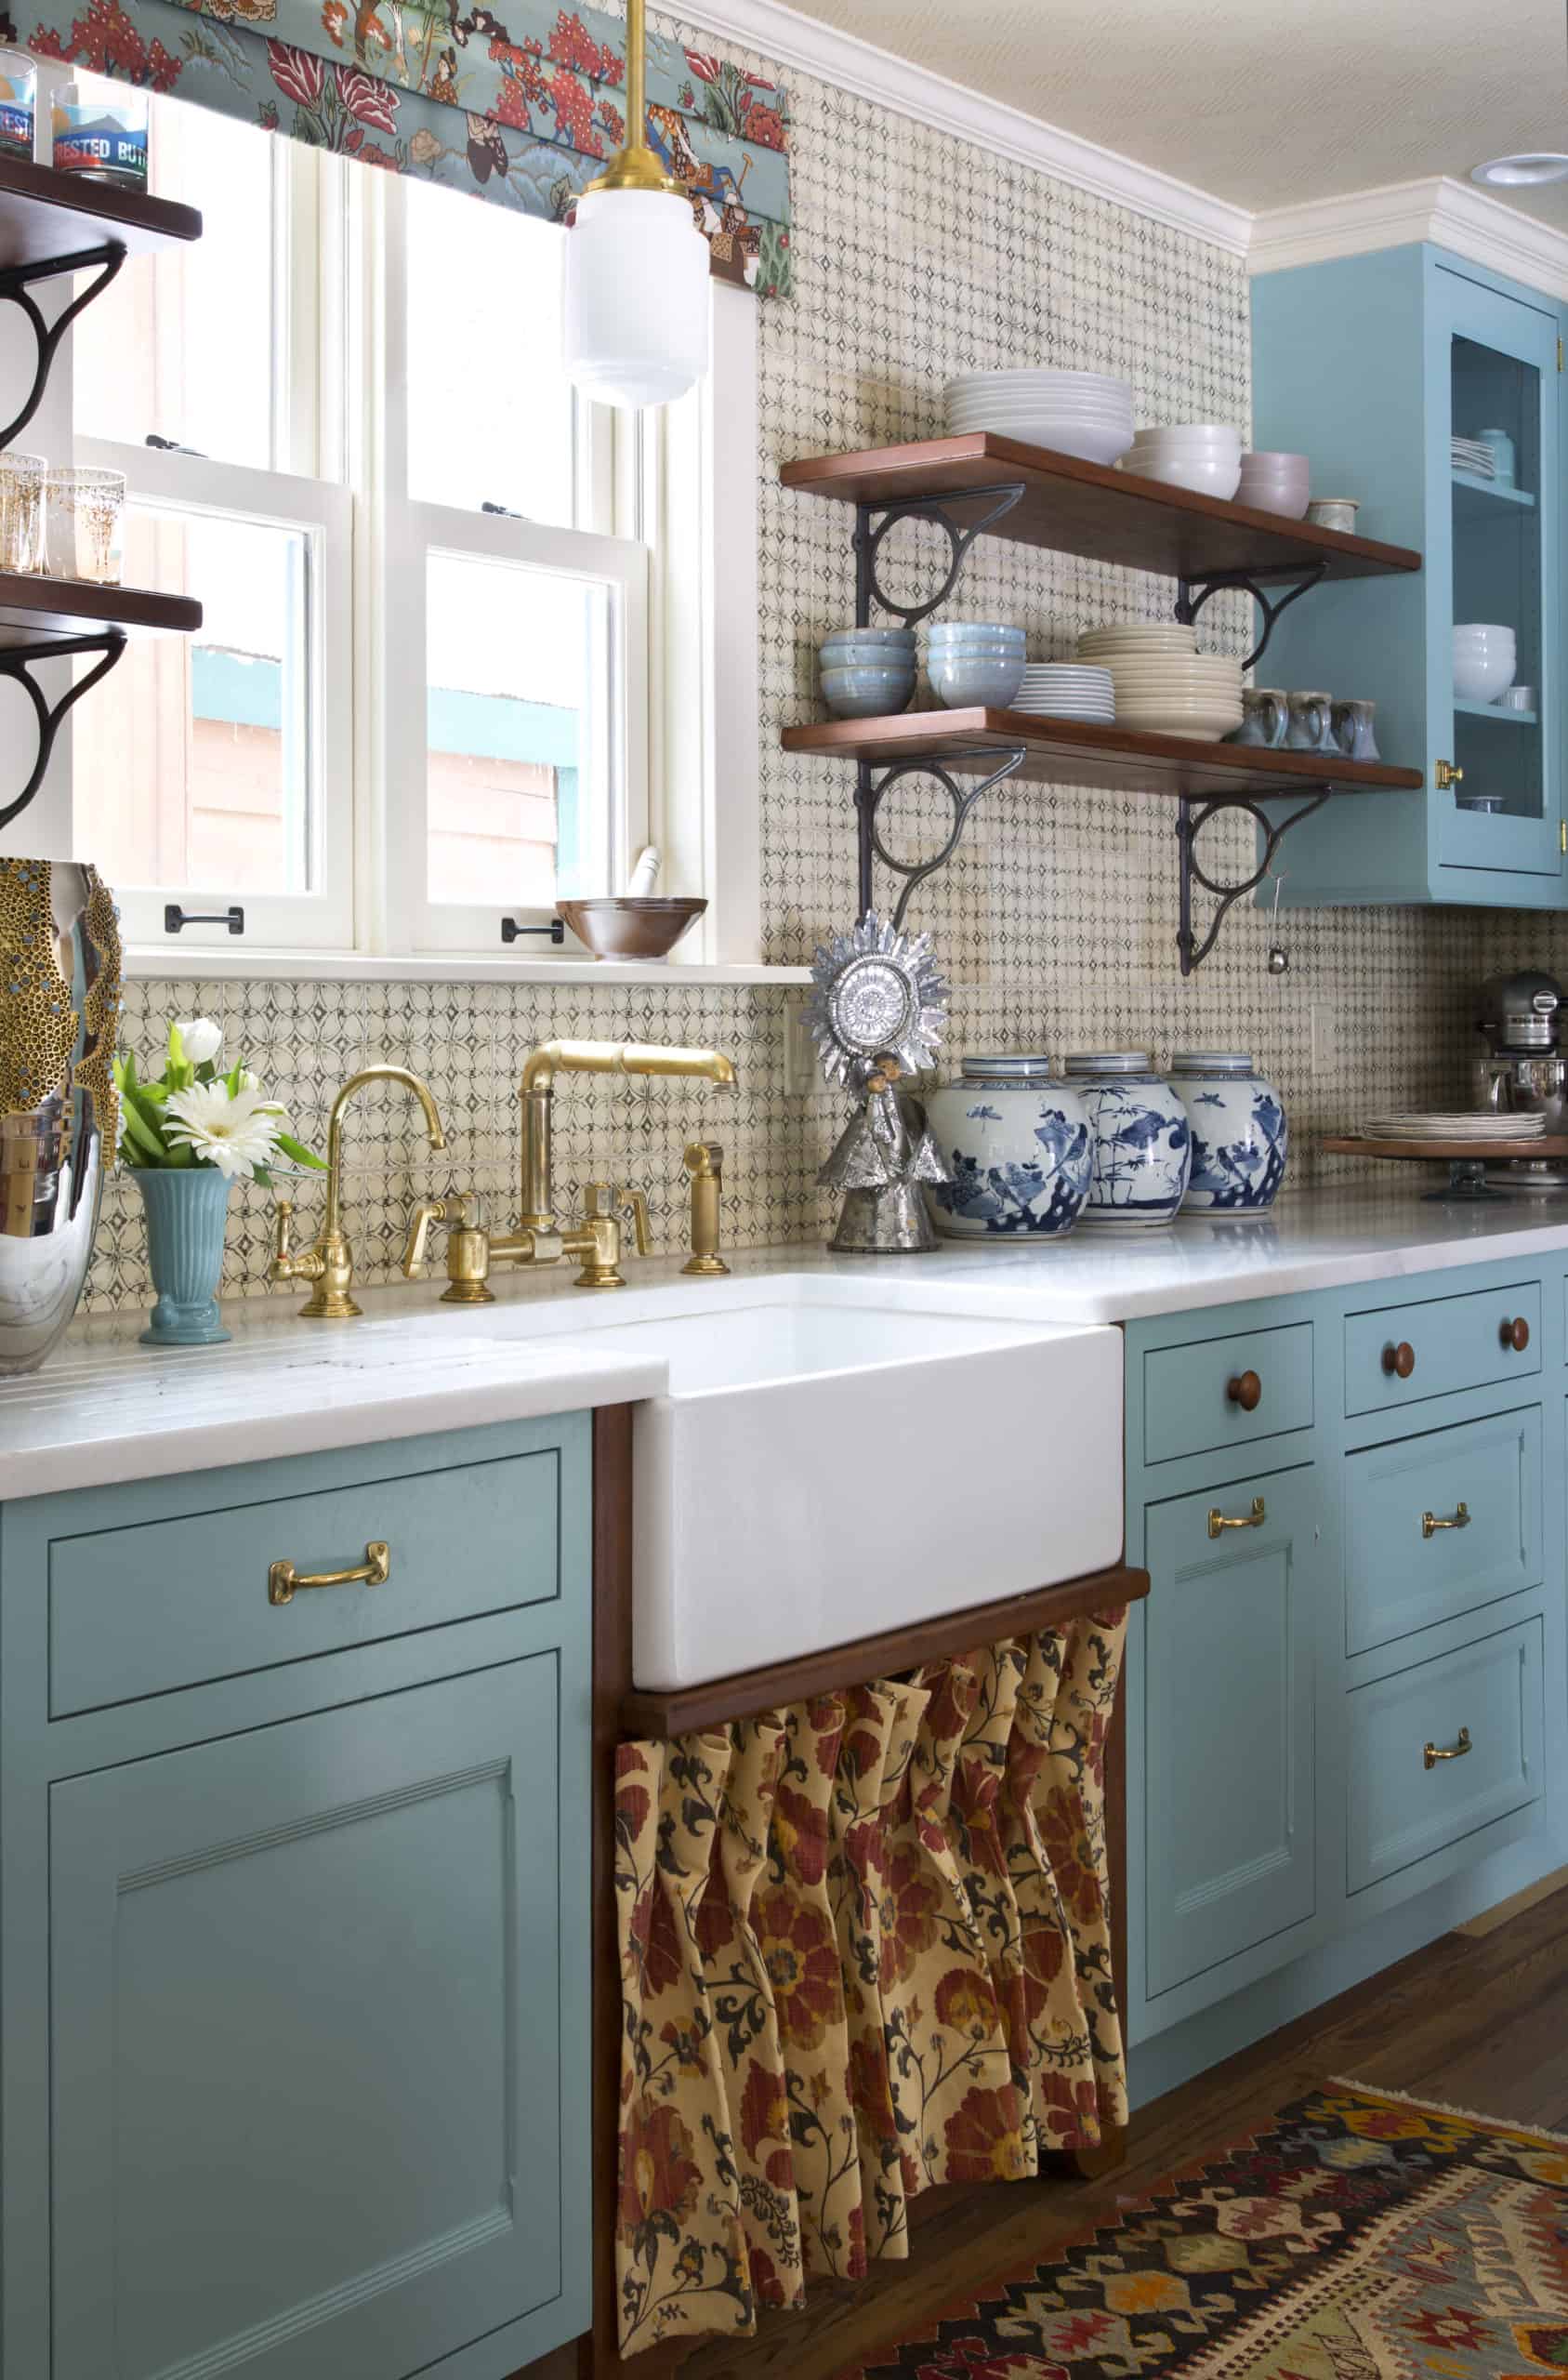 Farmhouse sink in country kitchen with light blue turquoise cabinets